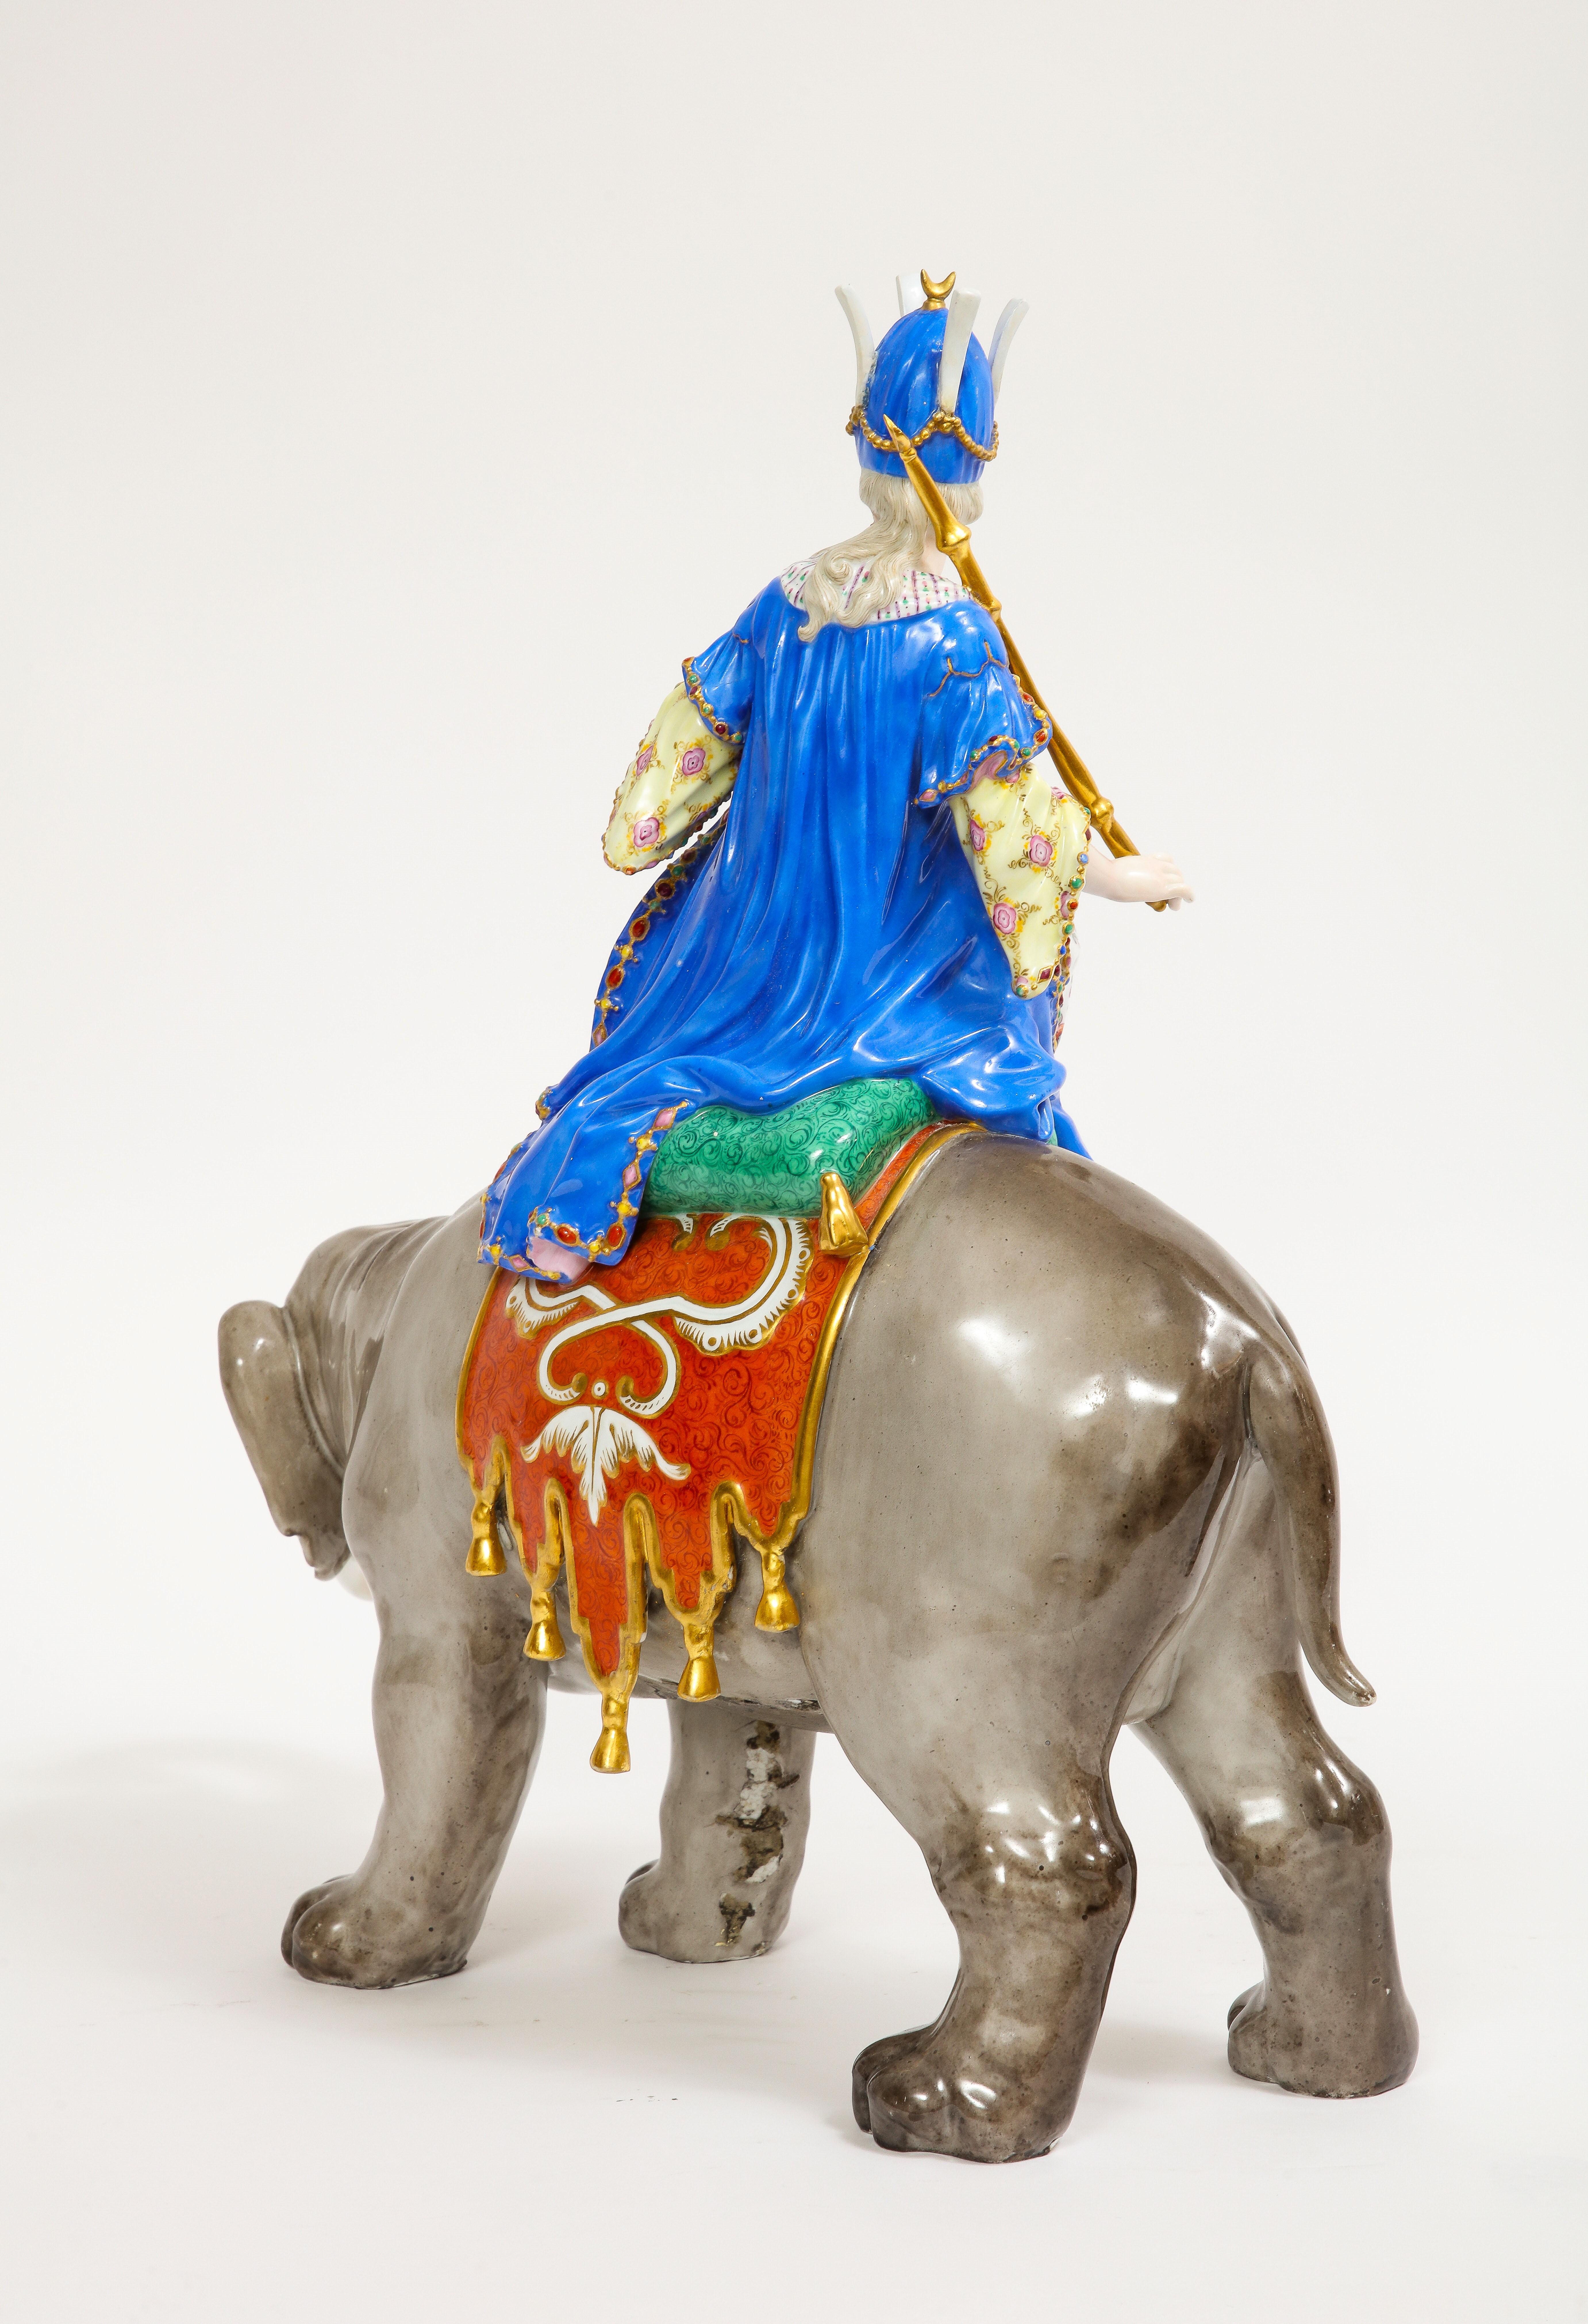 19th C. Meissen Porcelain Figure of a Sultana Riding an Elephant with a Crown For Sale 2